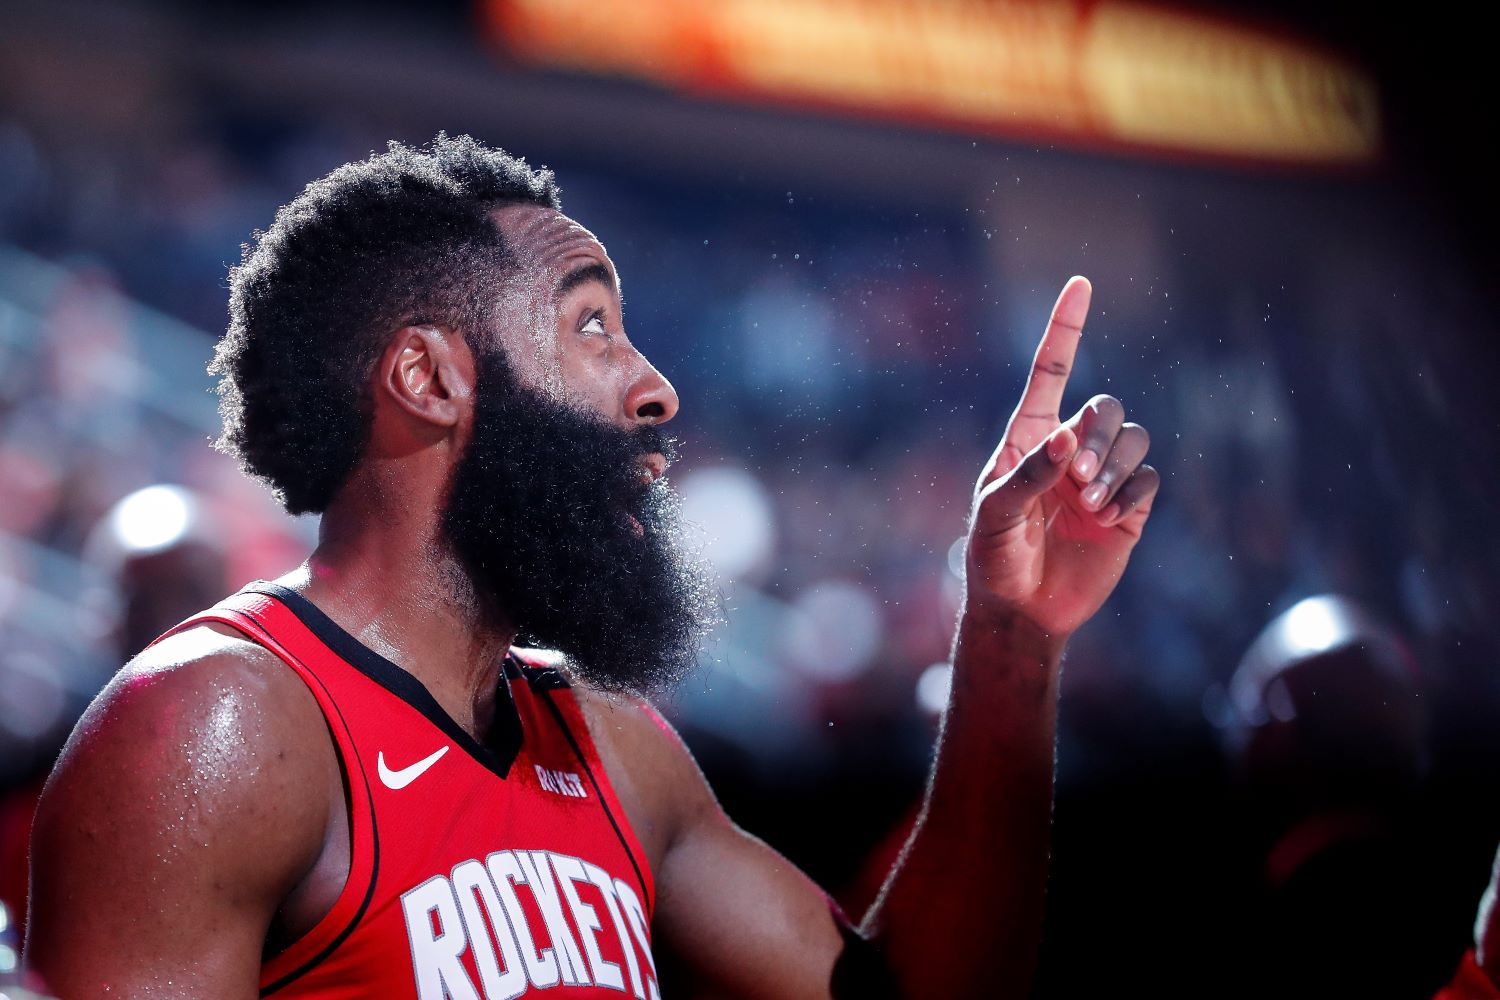 Rockets star James Harden wants out of Houston so badly that he recently added two more NBA teams to his preferred trade destination list.